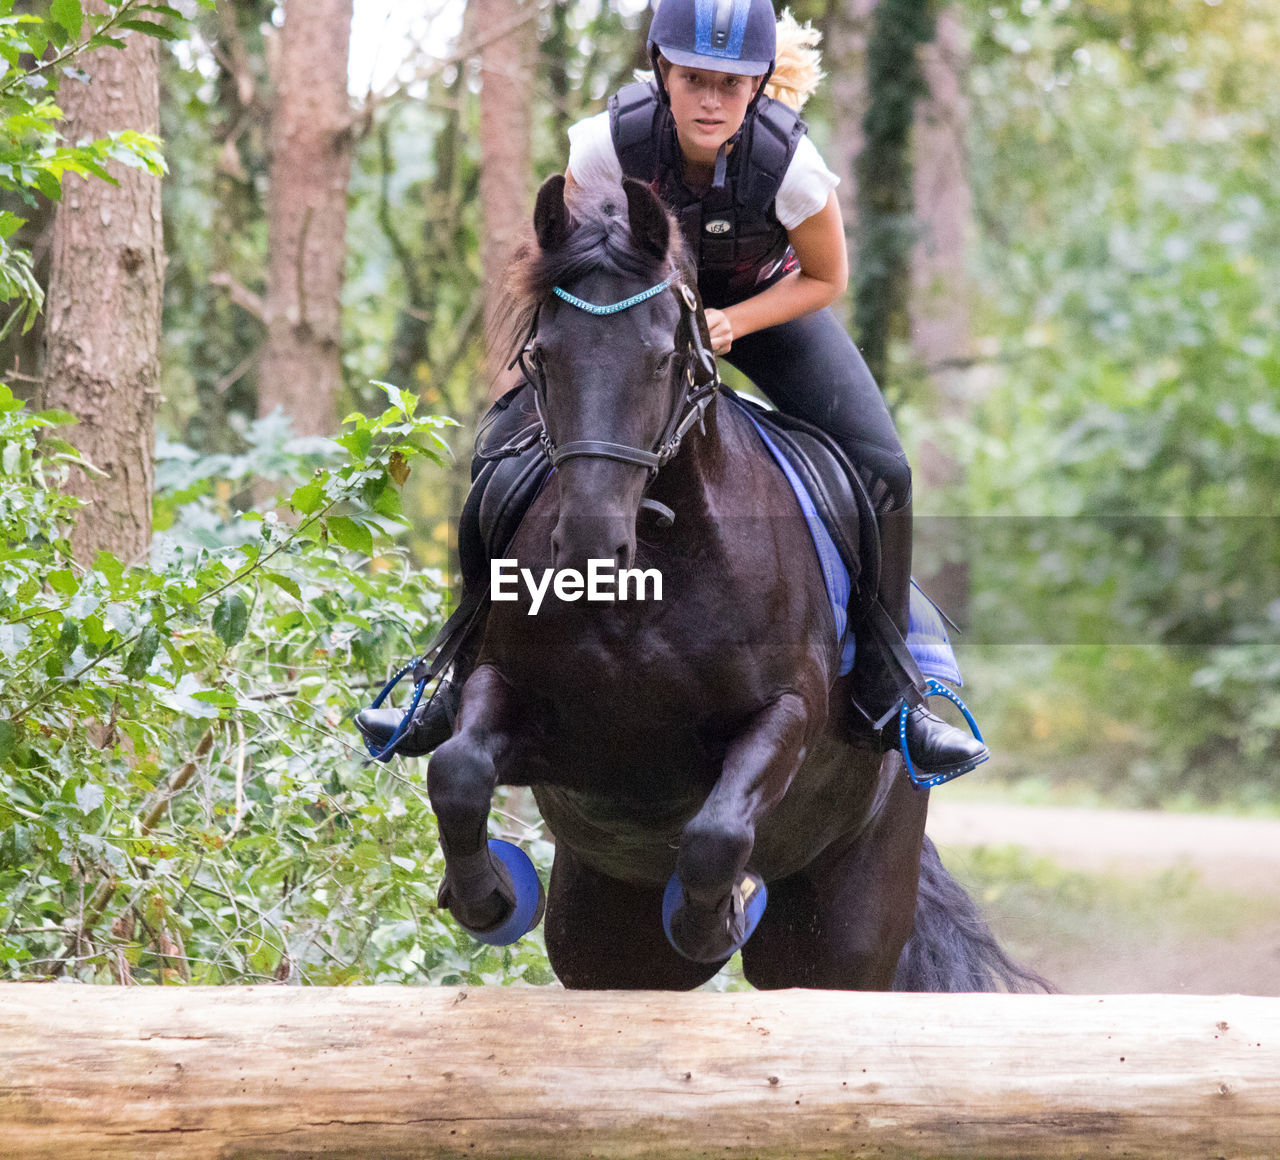 Woman riding horse jumping over obstacle at forest